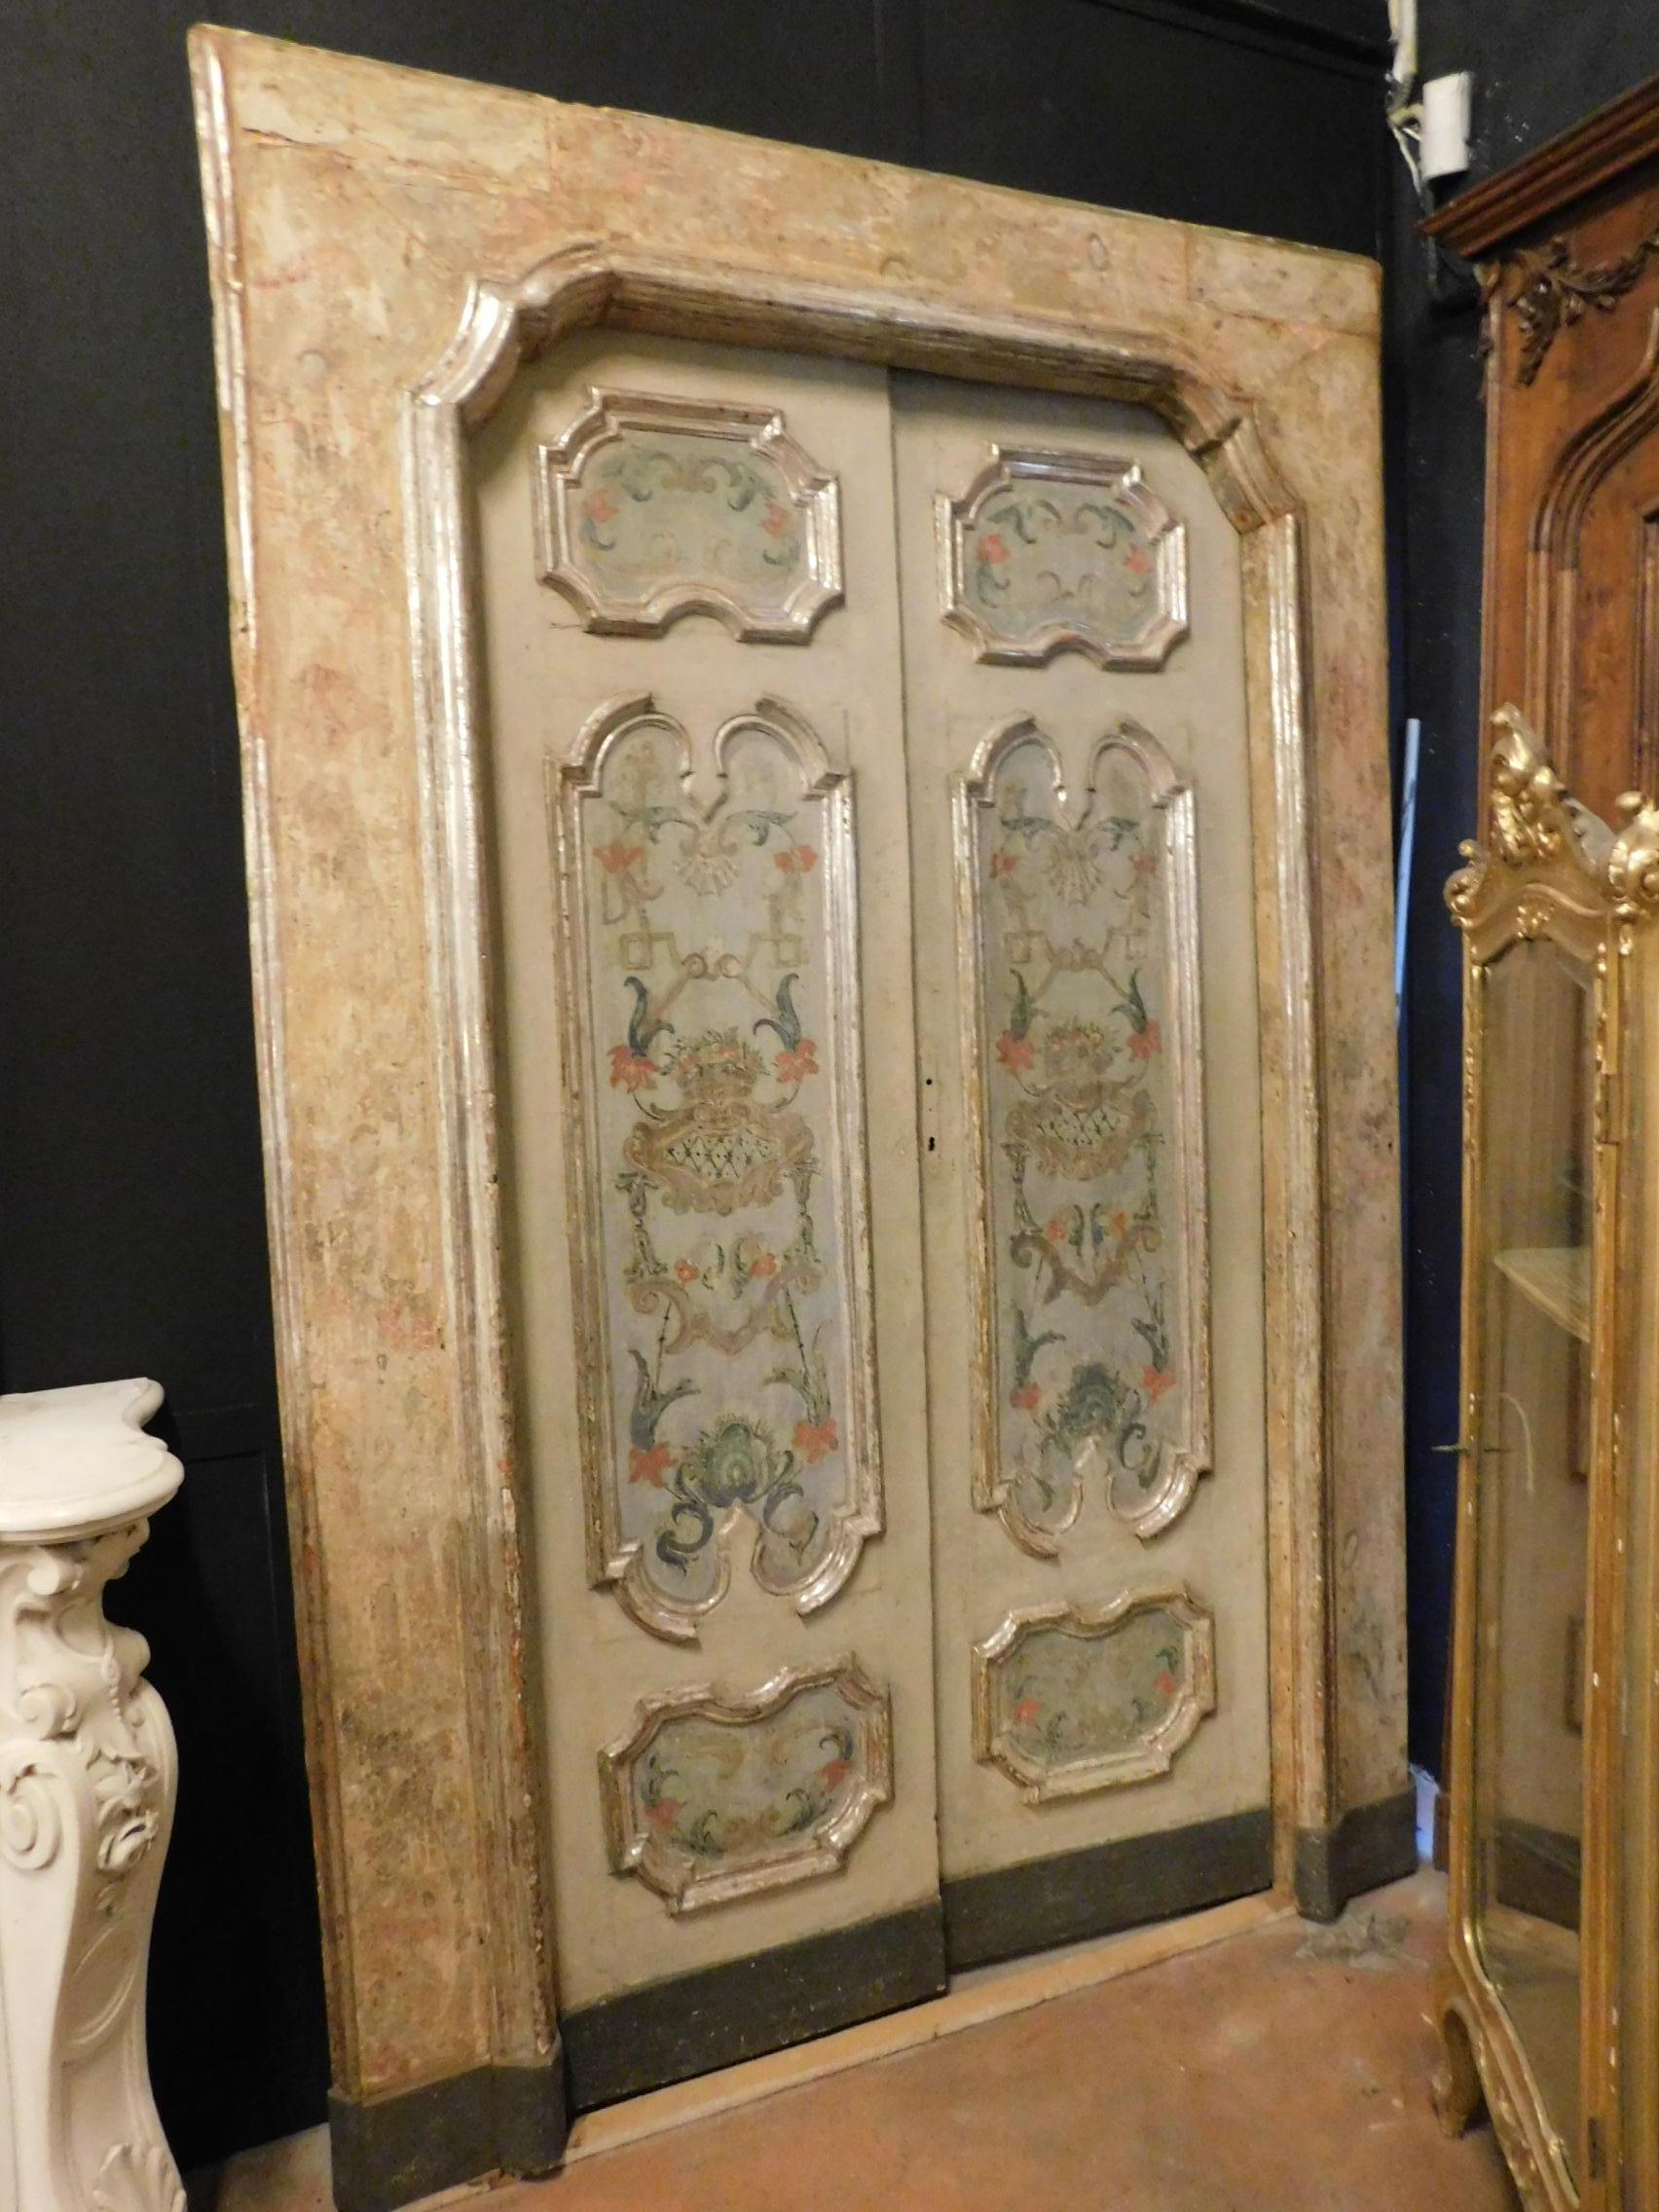 N. 2 antique Italian wood lacquered doors with silver frames, 18th century, different widths, the one of the photo is max cm 190 x H 275 with frame, passage light cm 132 x 246 H, simple back, the other is slightly smaller, come from a noble family